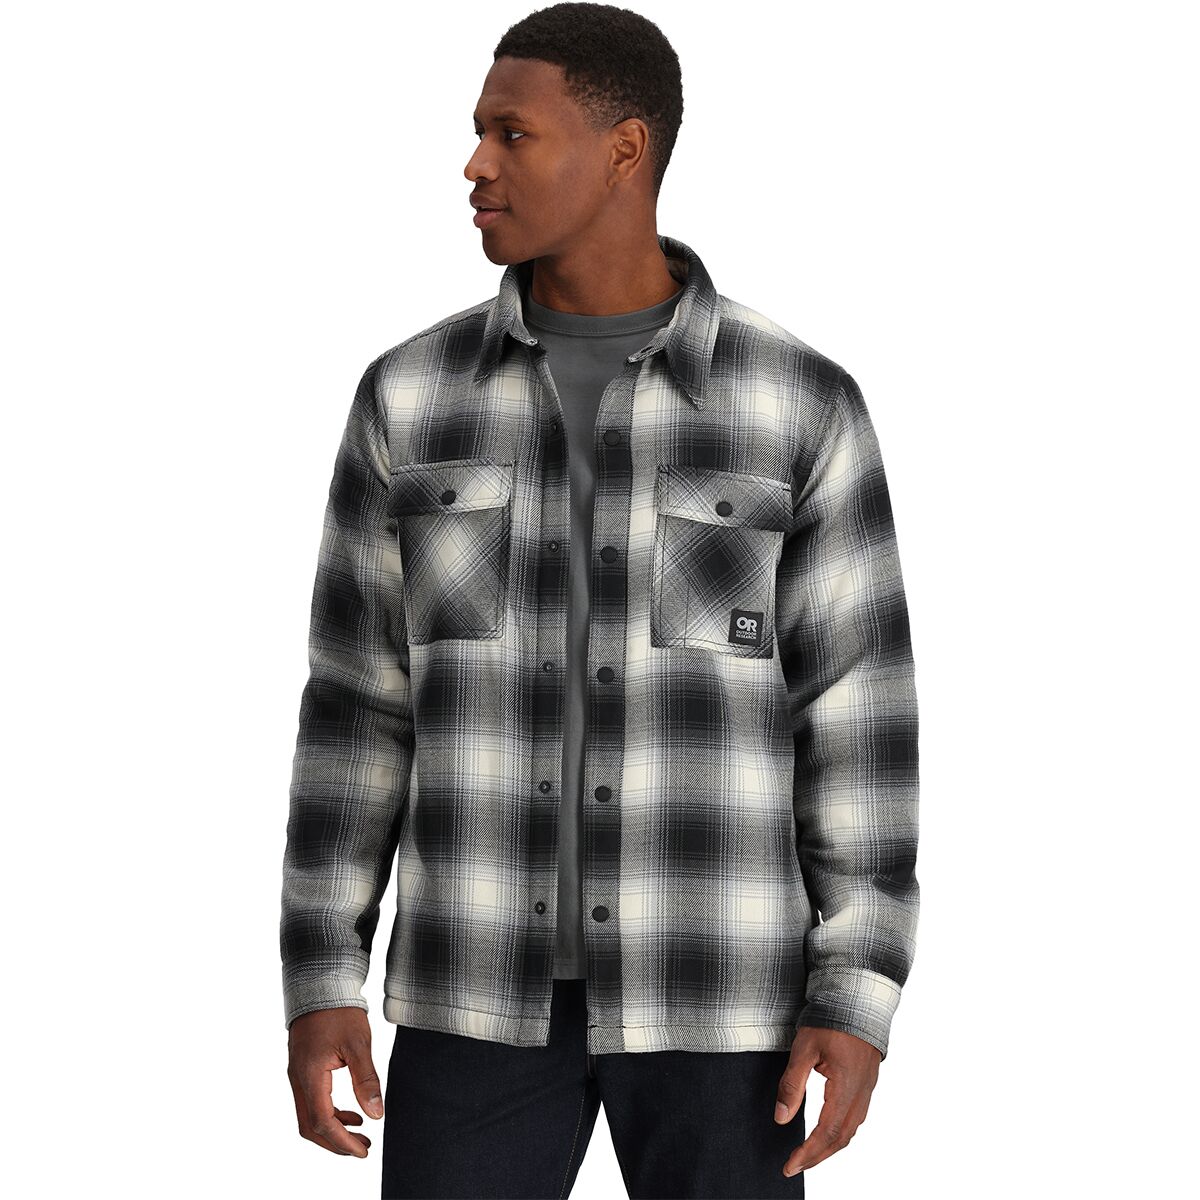 Outdoor Research Feedback Shirt Jacket - Men's - Clothing